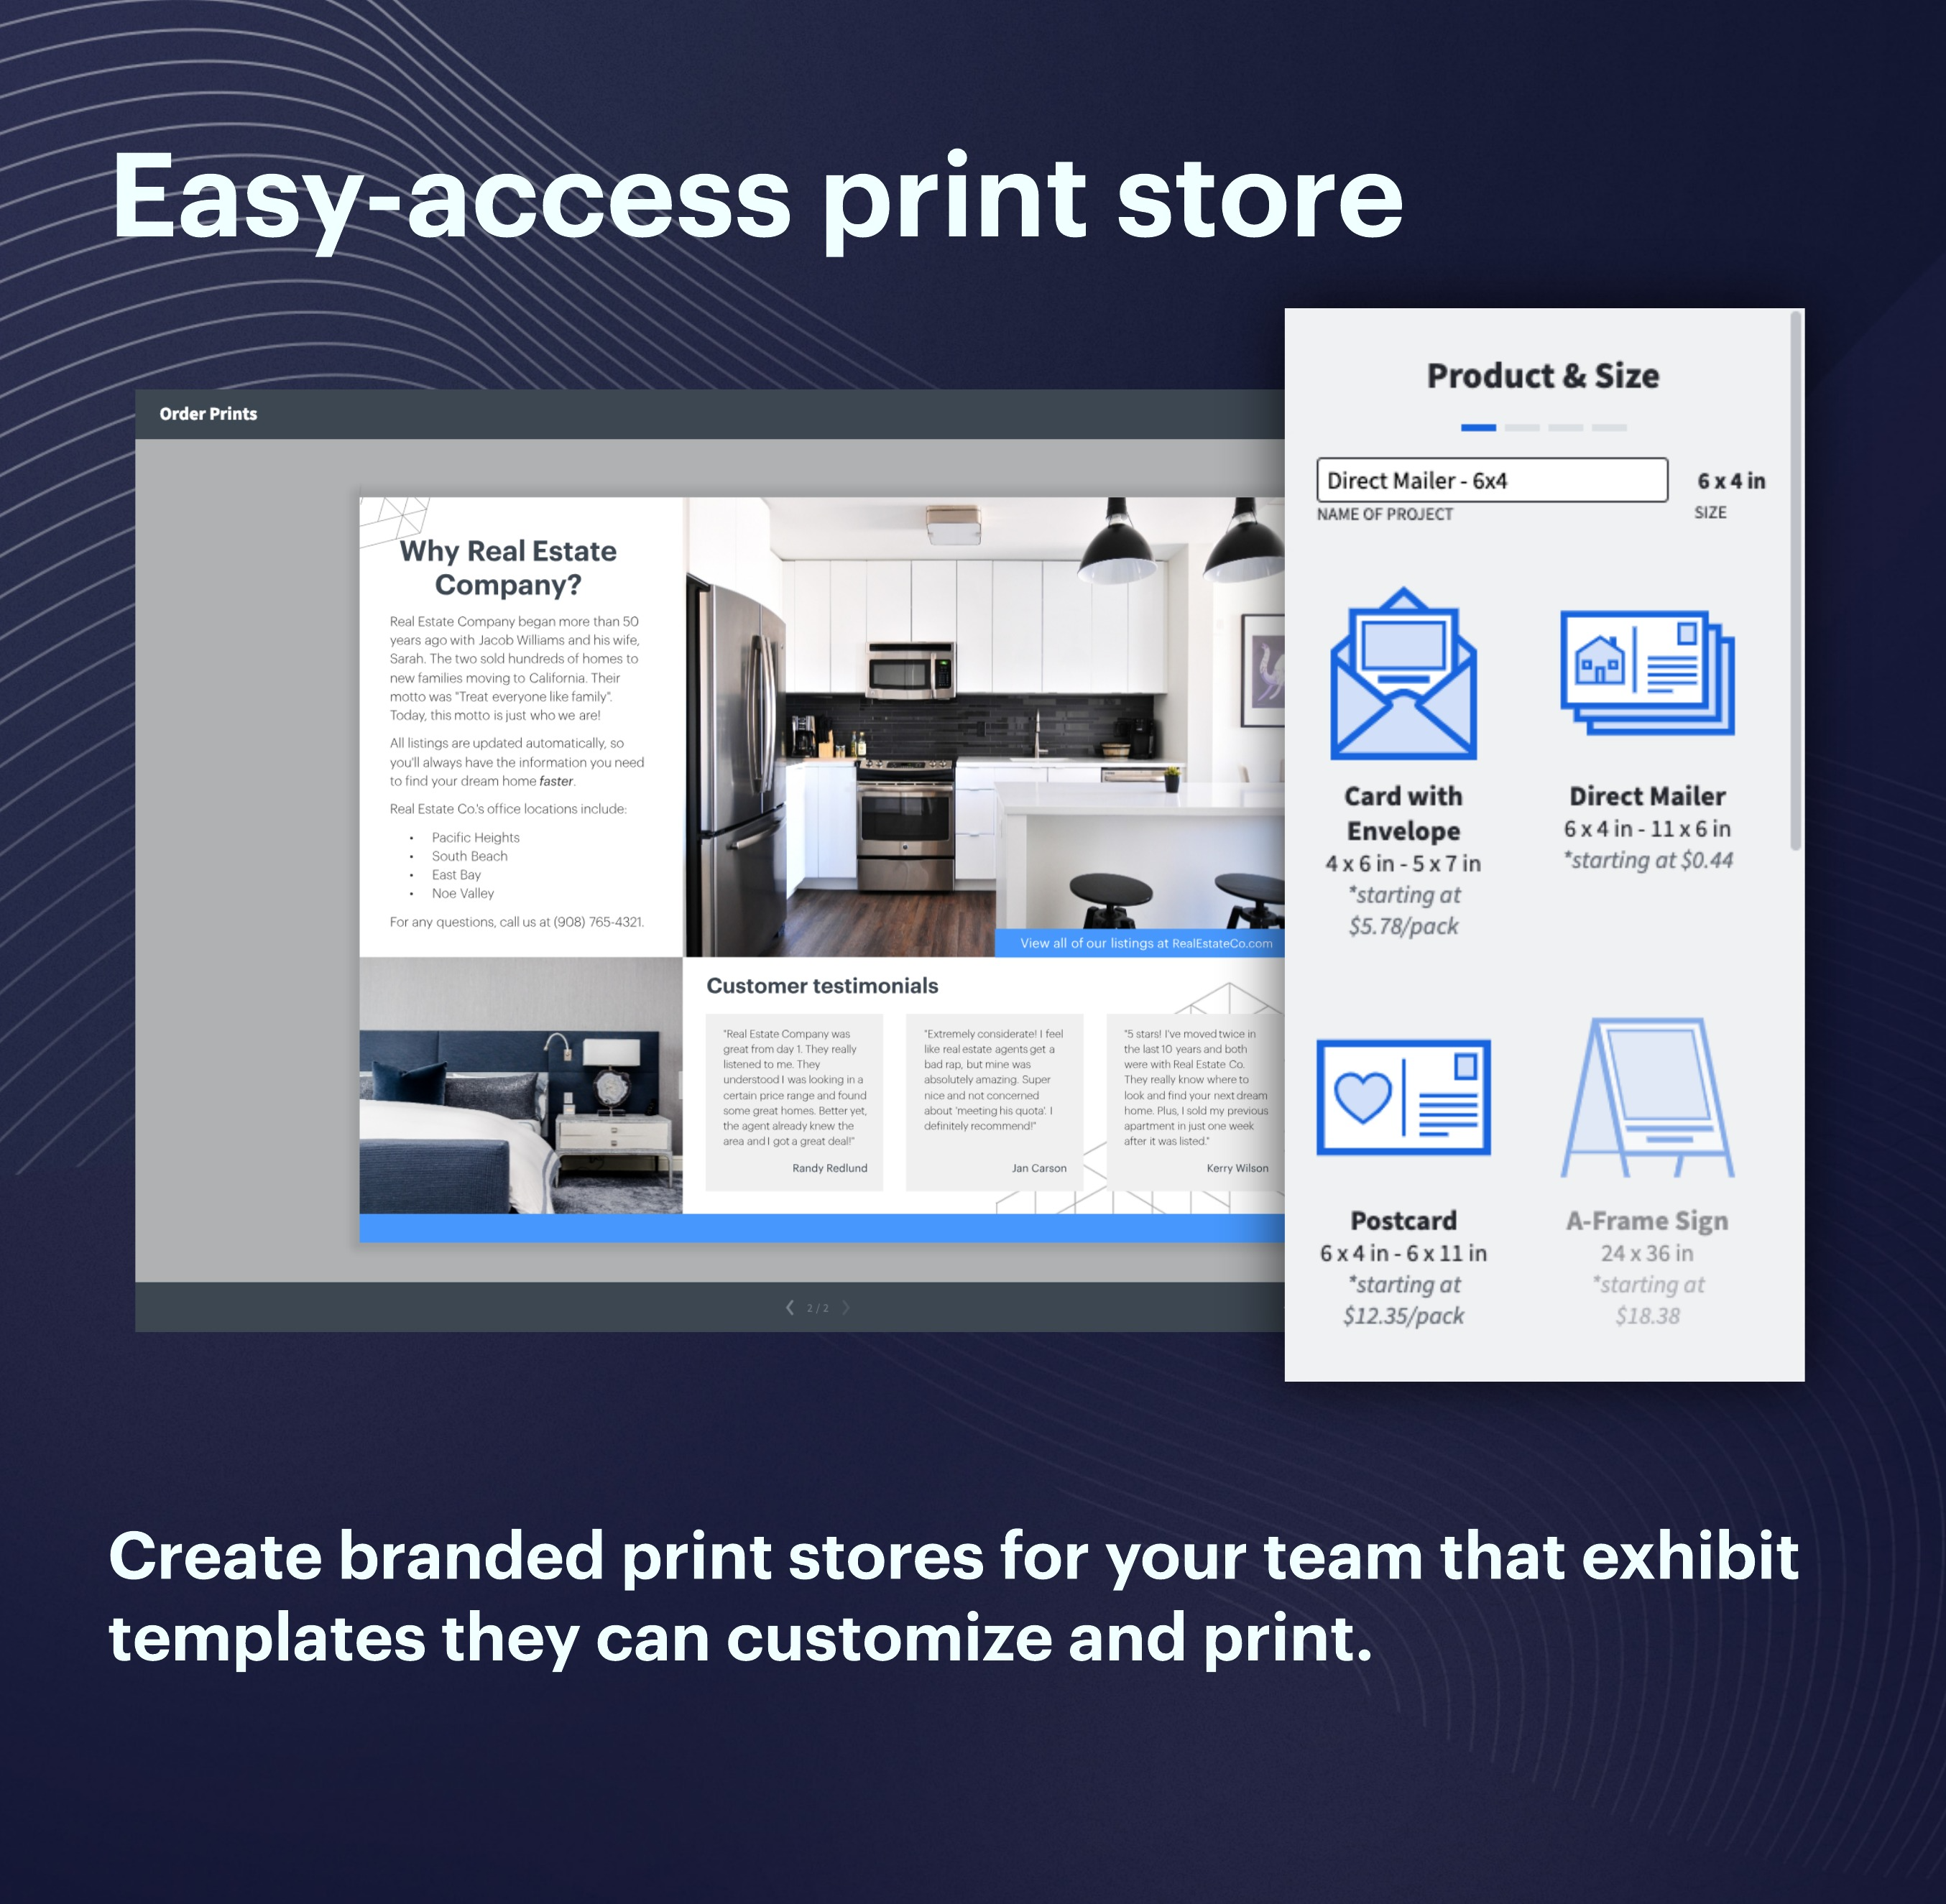 Marq Software - Create branded print stores for your team and exhibit templates they can customize and print.